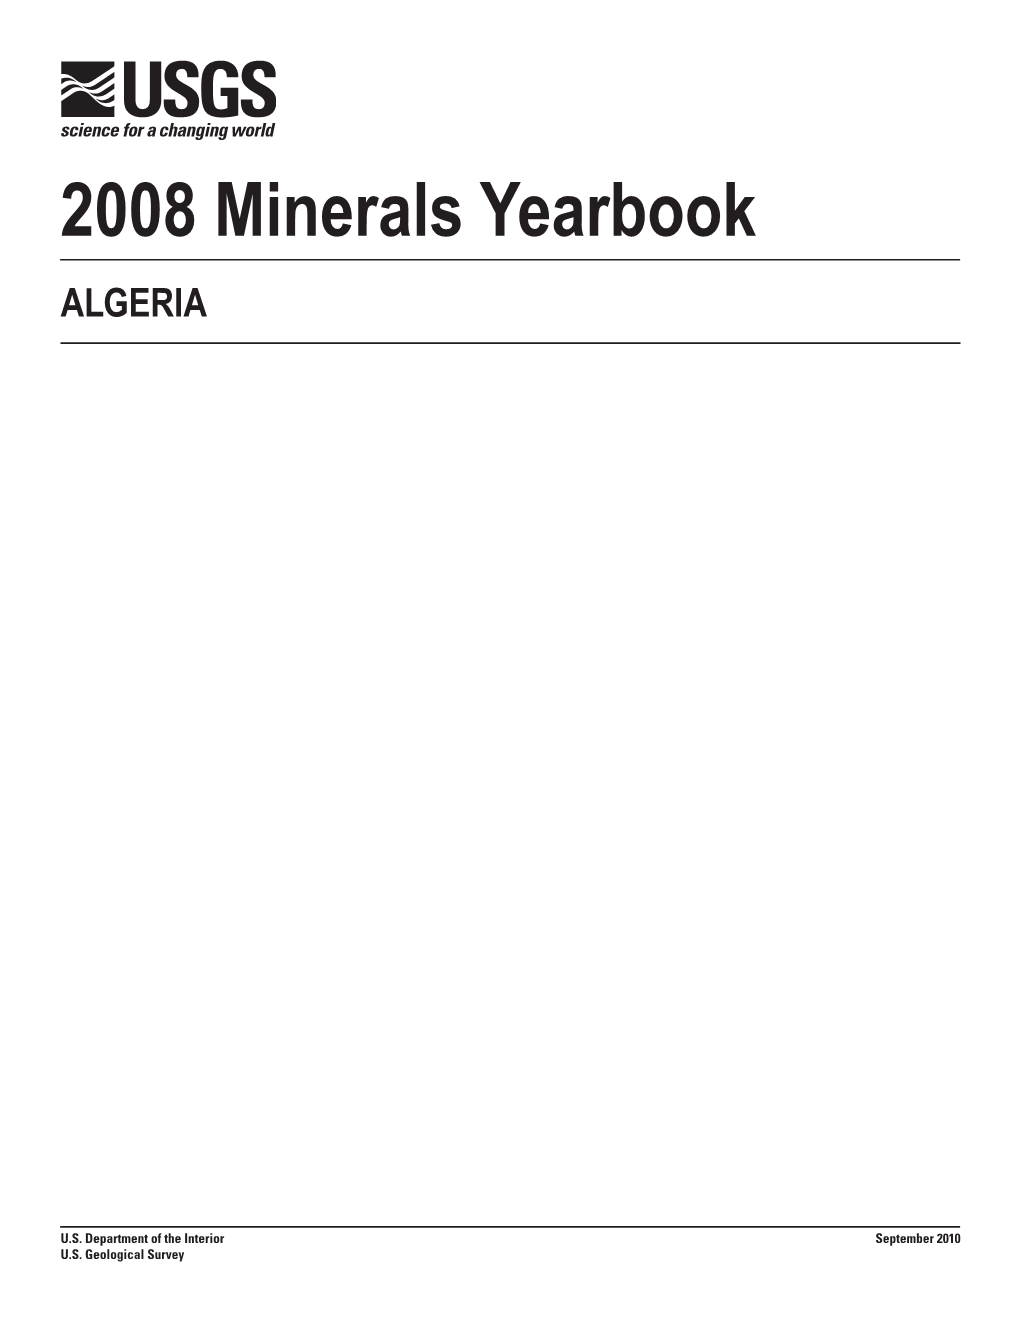 The Mineral Industry of Algeria in 2008